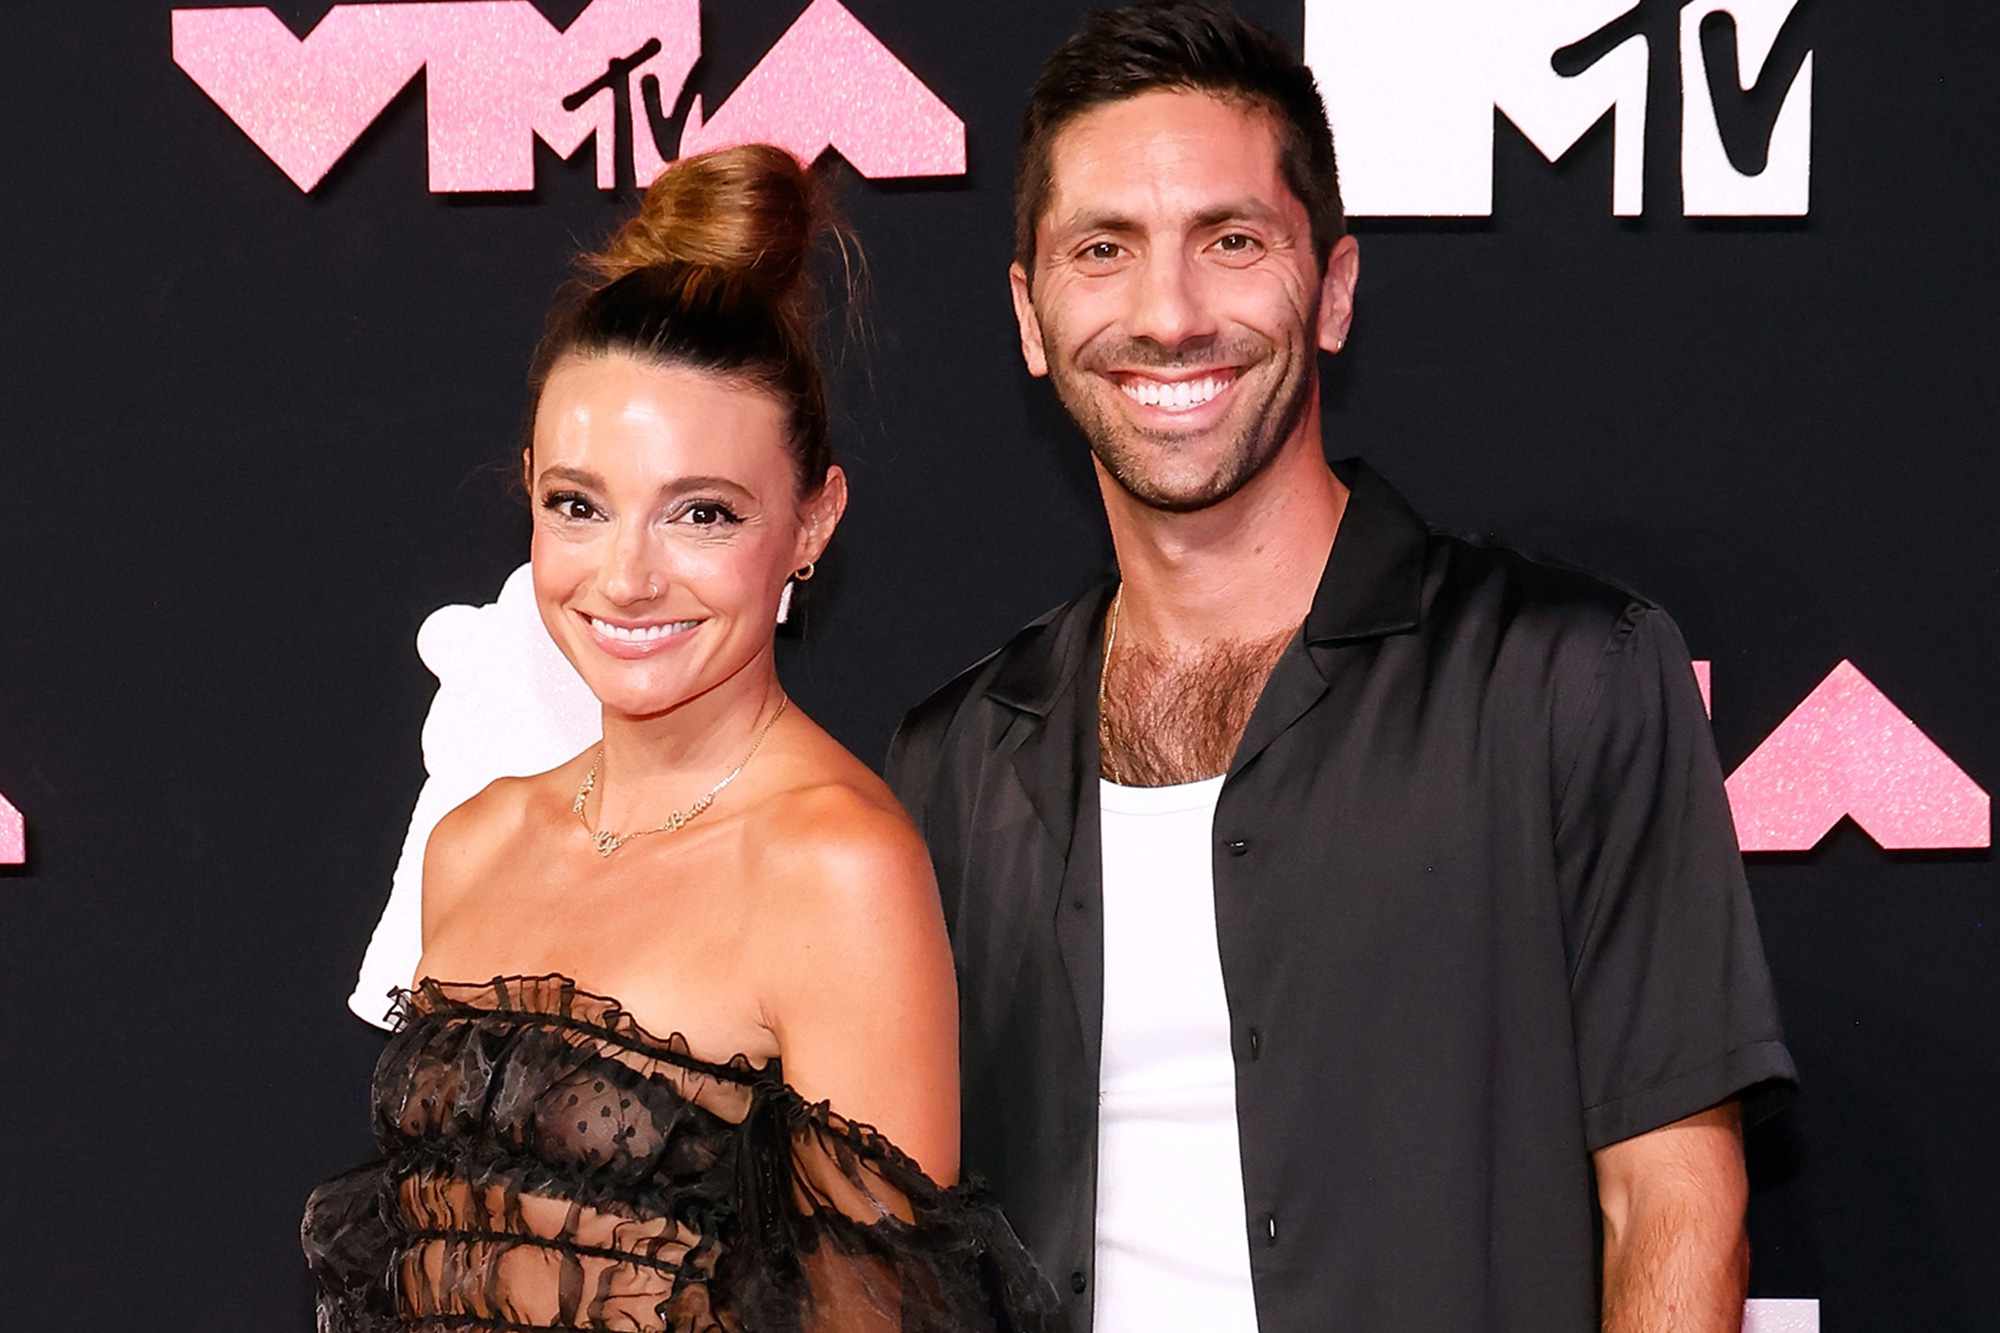 Who Is Nev Schulman's Wife? All About Laura Perlongo